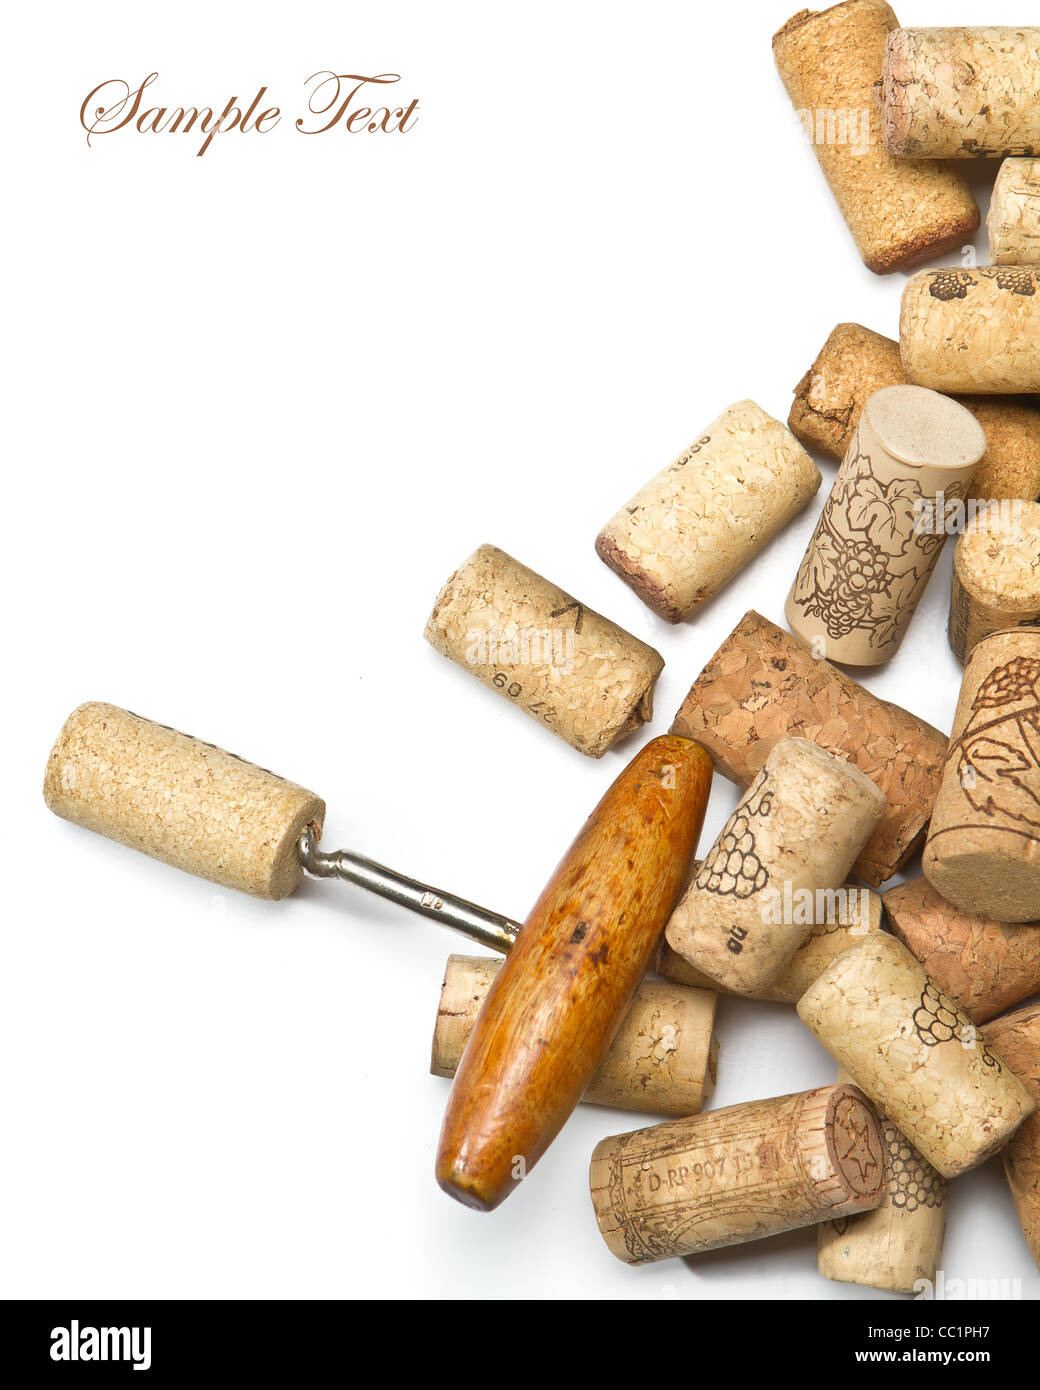 Corkscrews and corks. on a white background Stock Photo